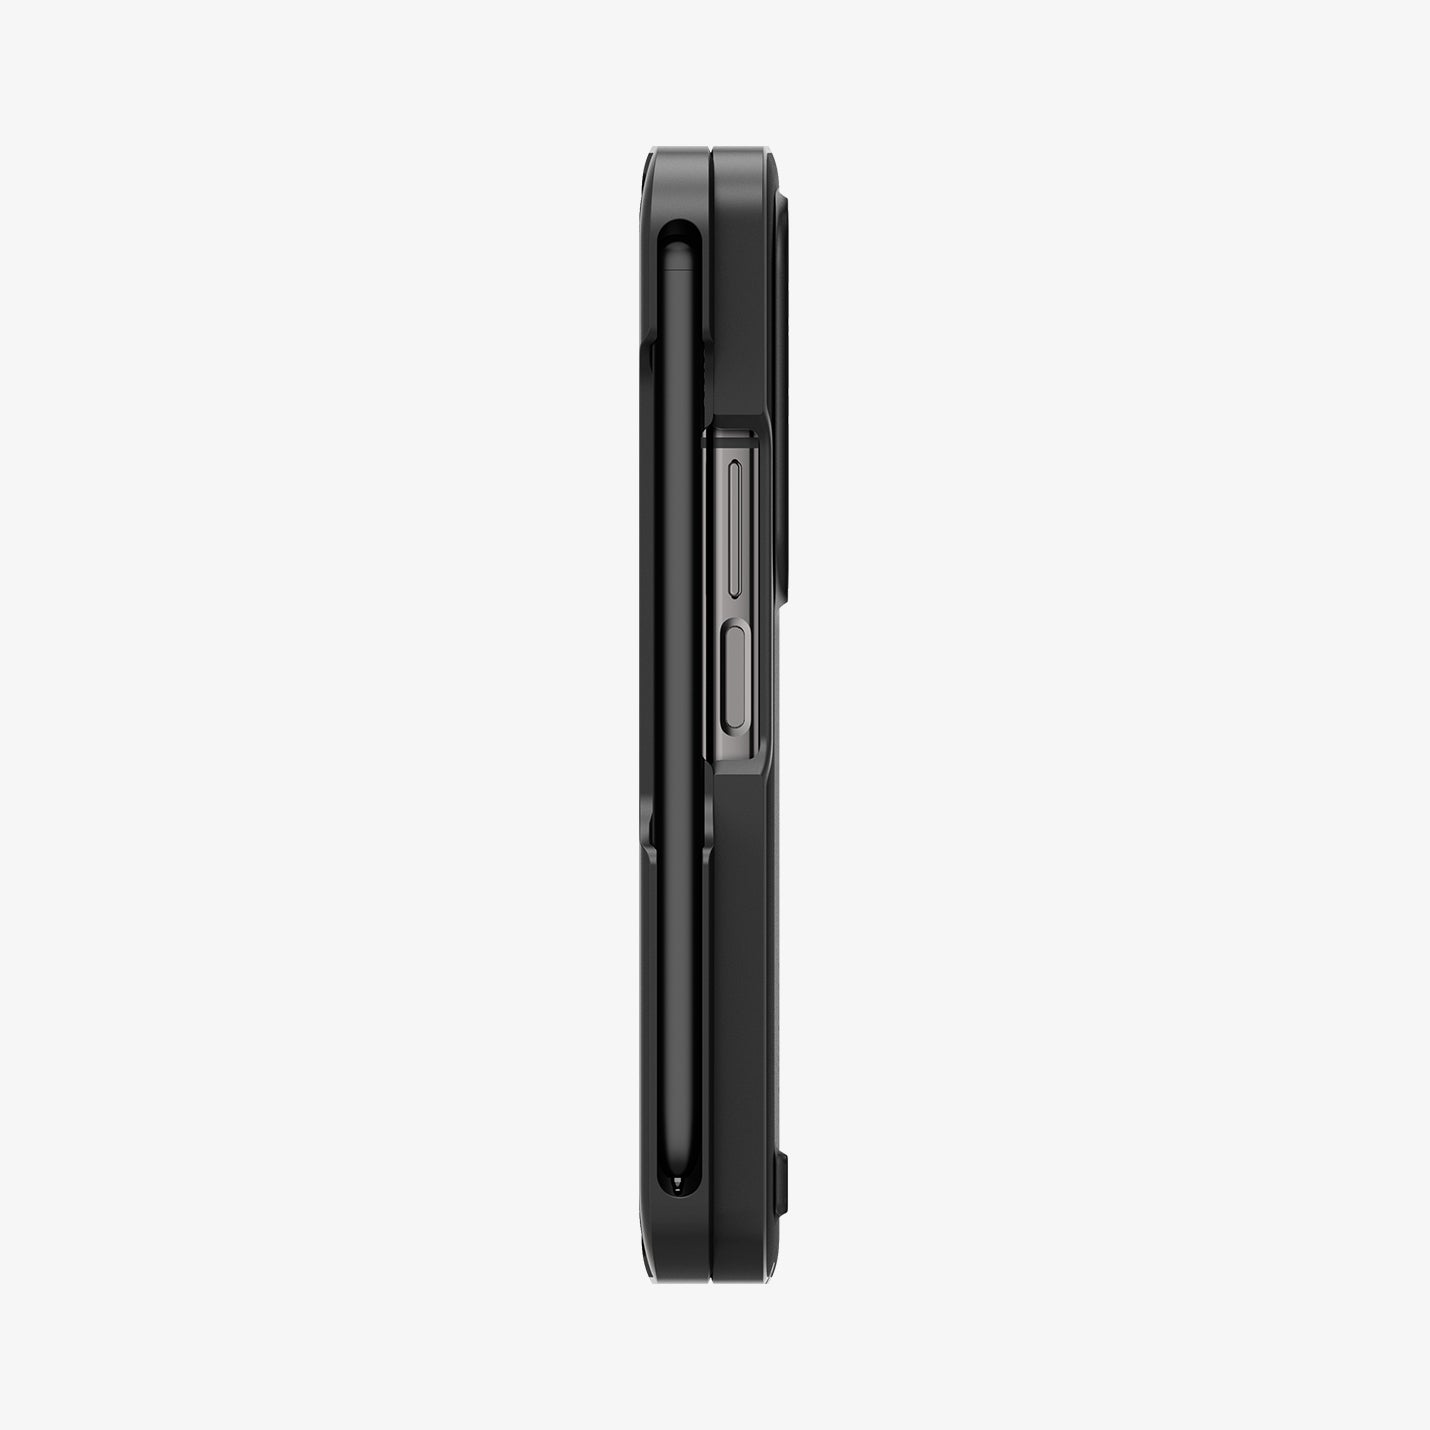 ACS05099 - Galaxy Z Fold 4 Case Thin Fit P in black showing both the sides with volume controls and s pen slot